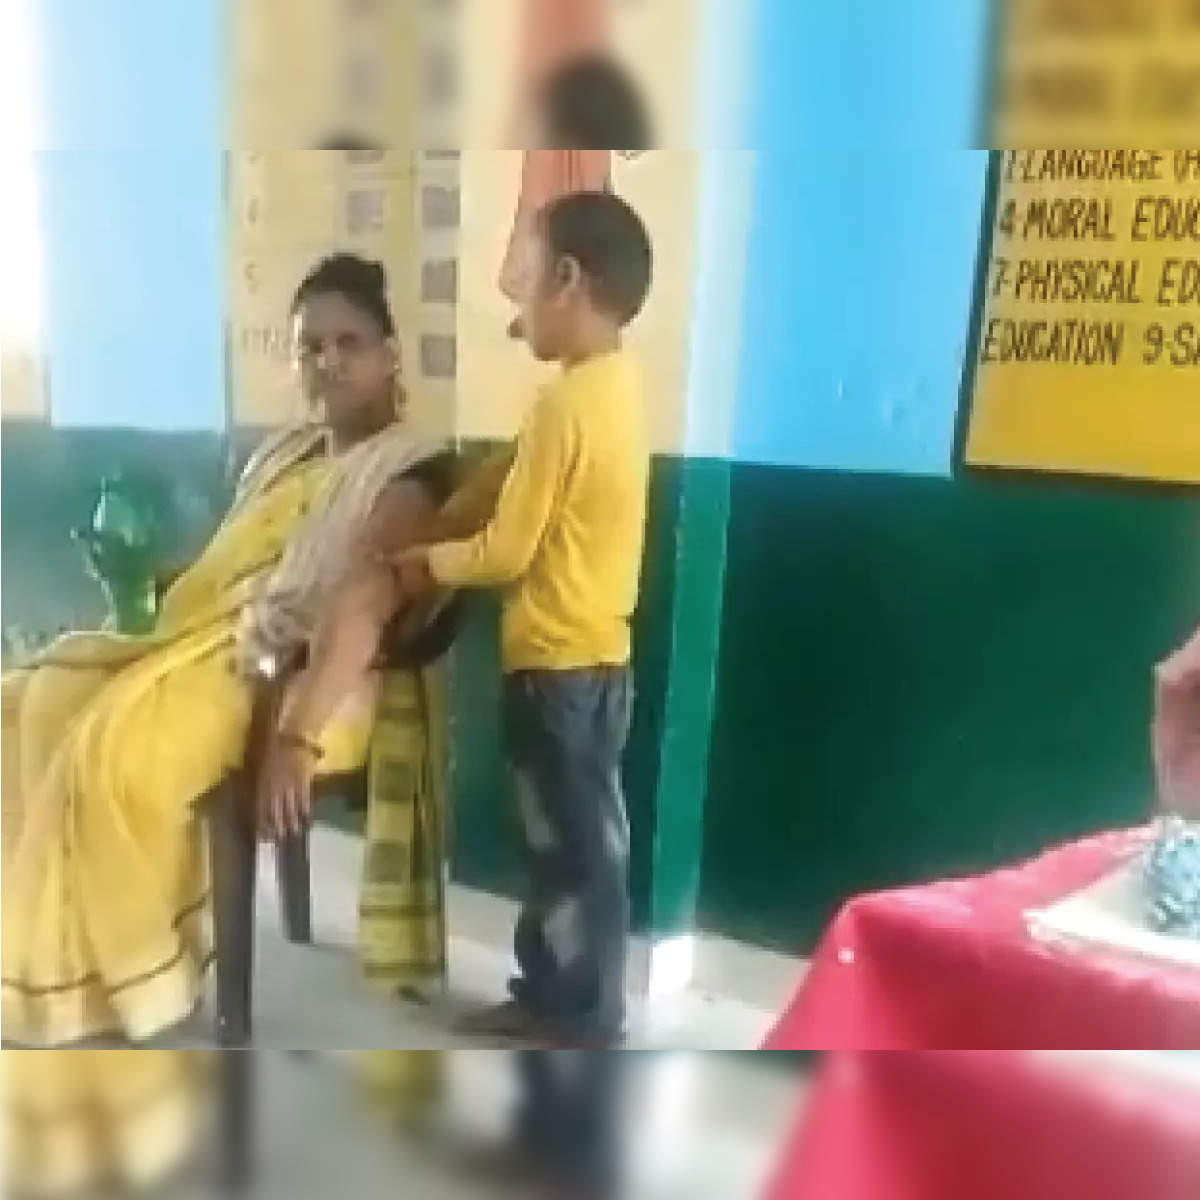 1200px x 1200px - Teacher Massage: Teacher gets student to massage her arm, is suspended:  Viral video - The Economic Times